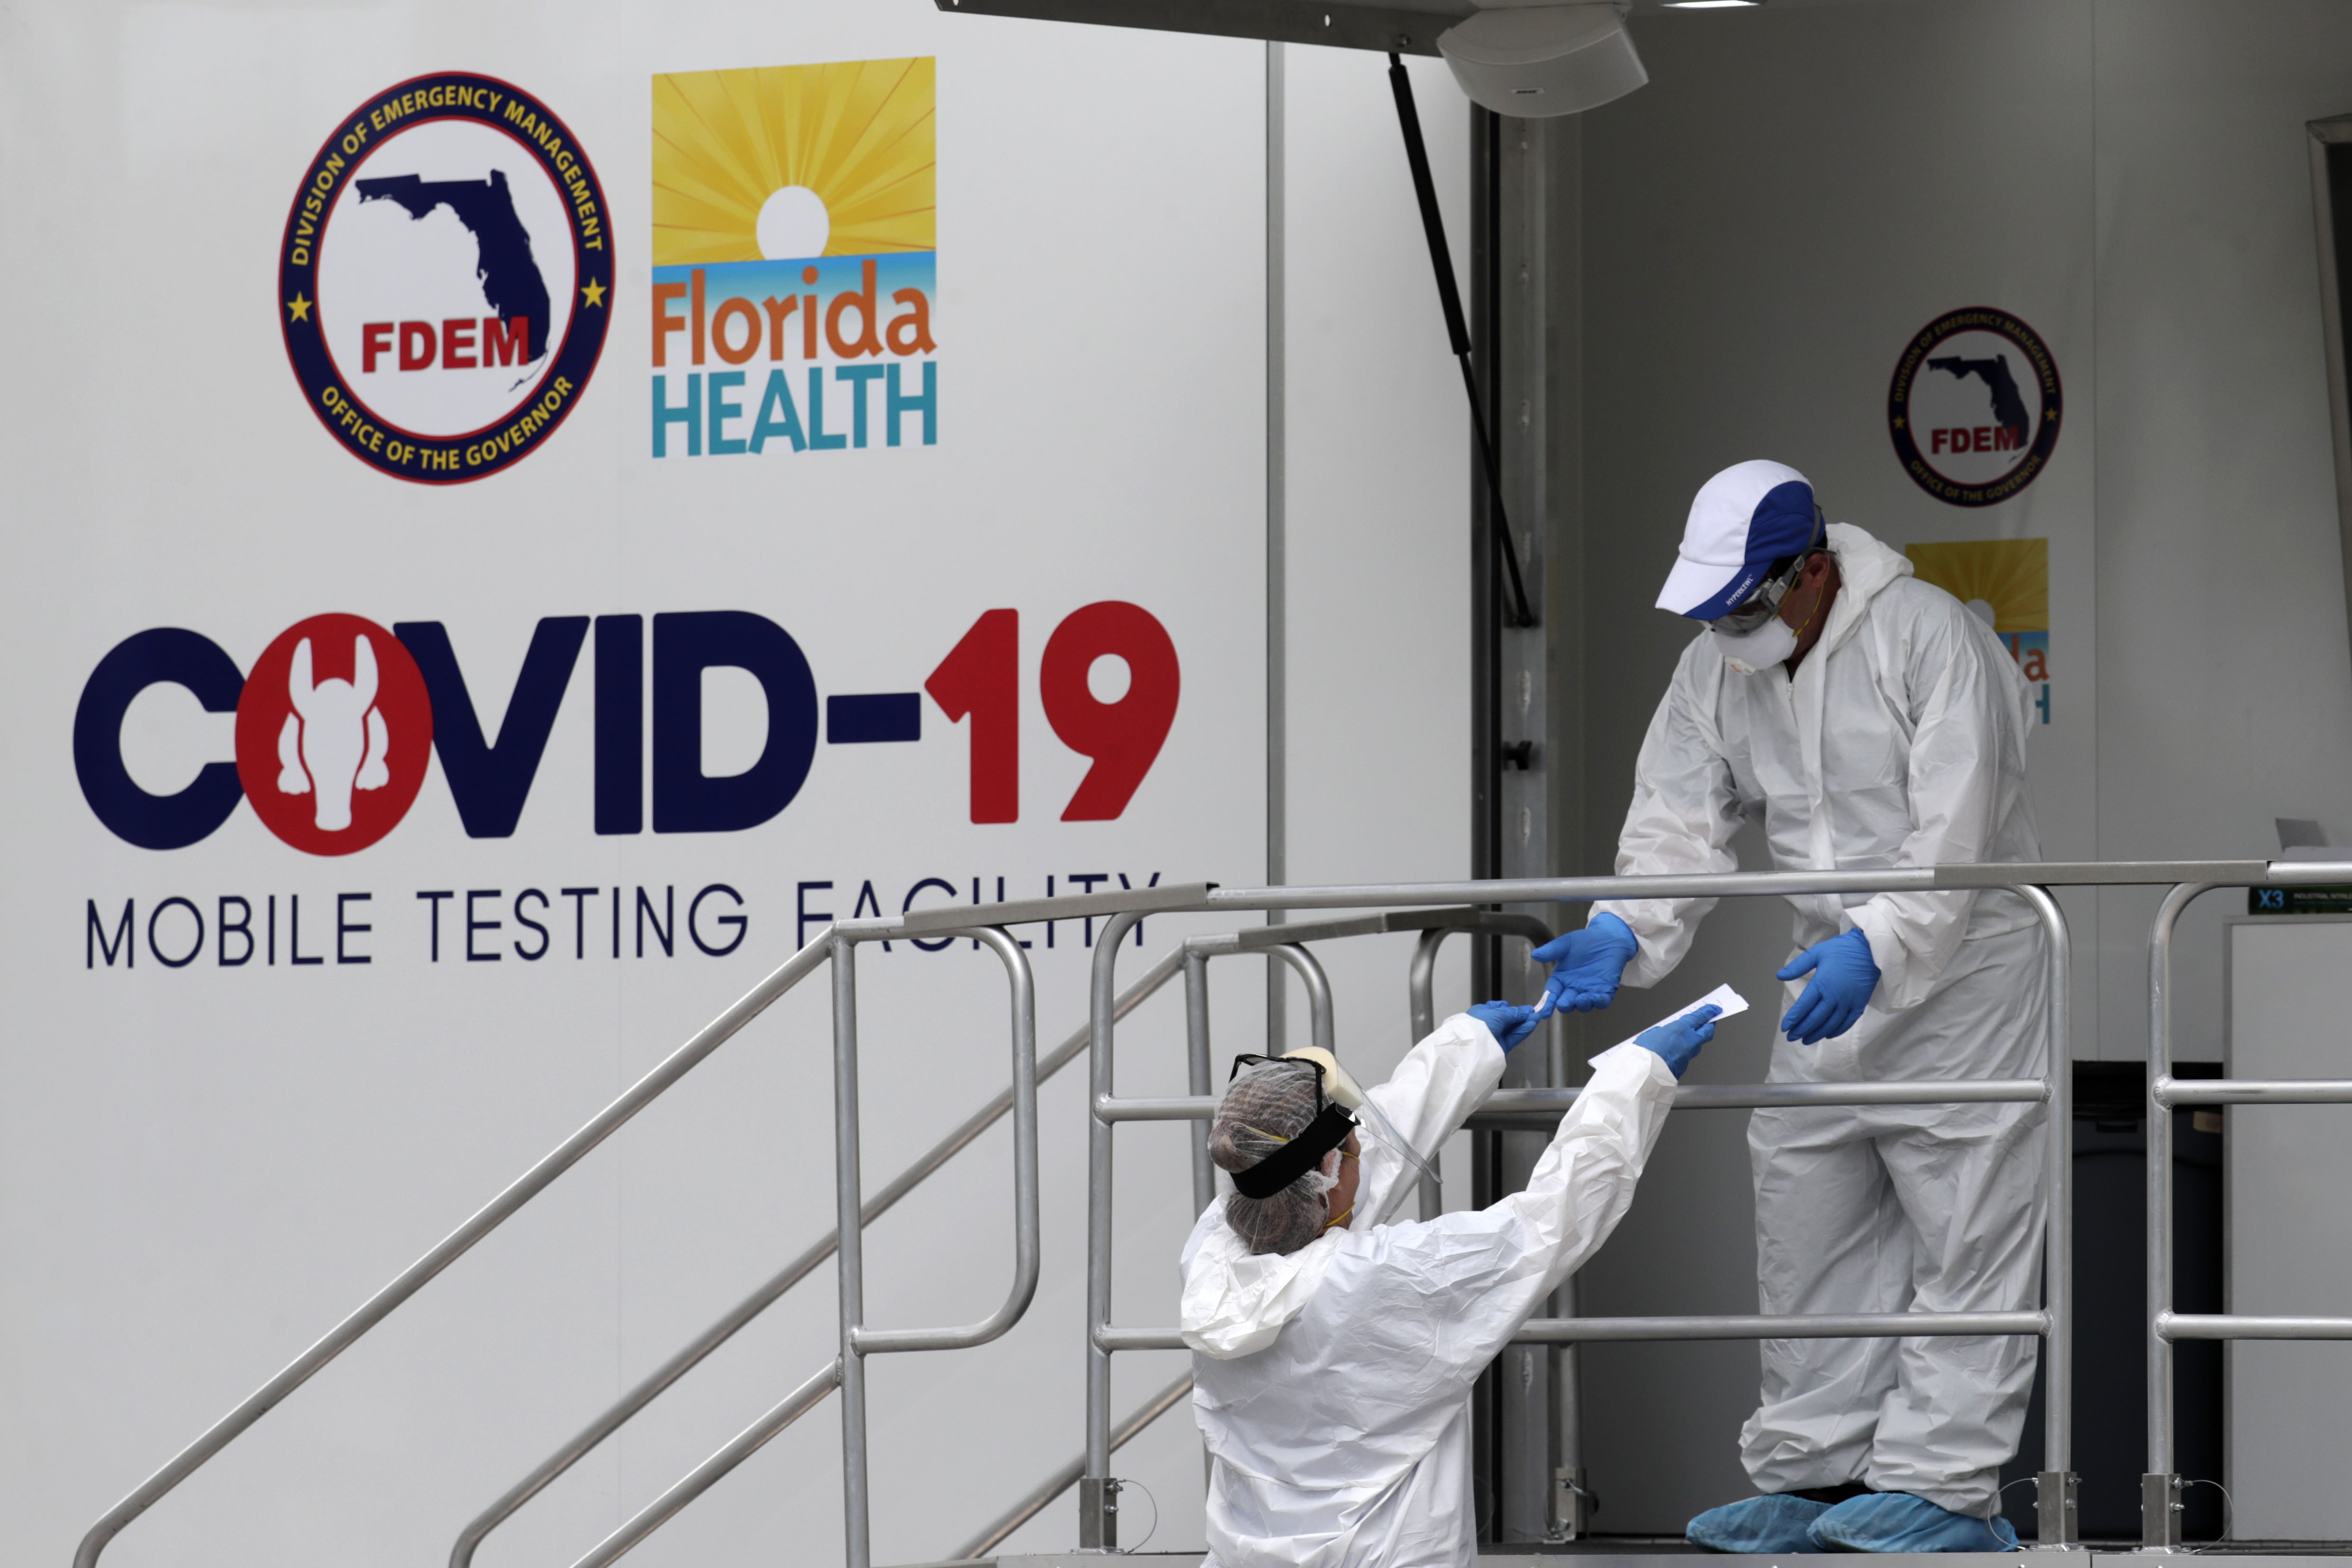 Health care personnel work at a walk-up Covid-19 testing site in Miami Beach, Florida, on July 17.